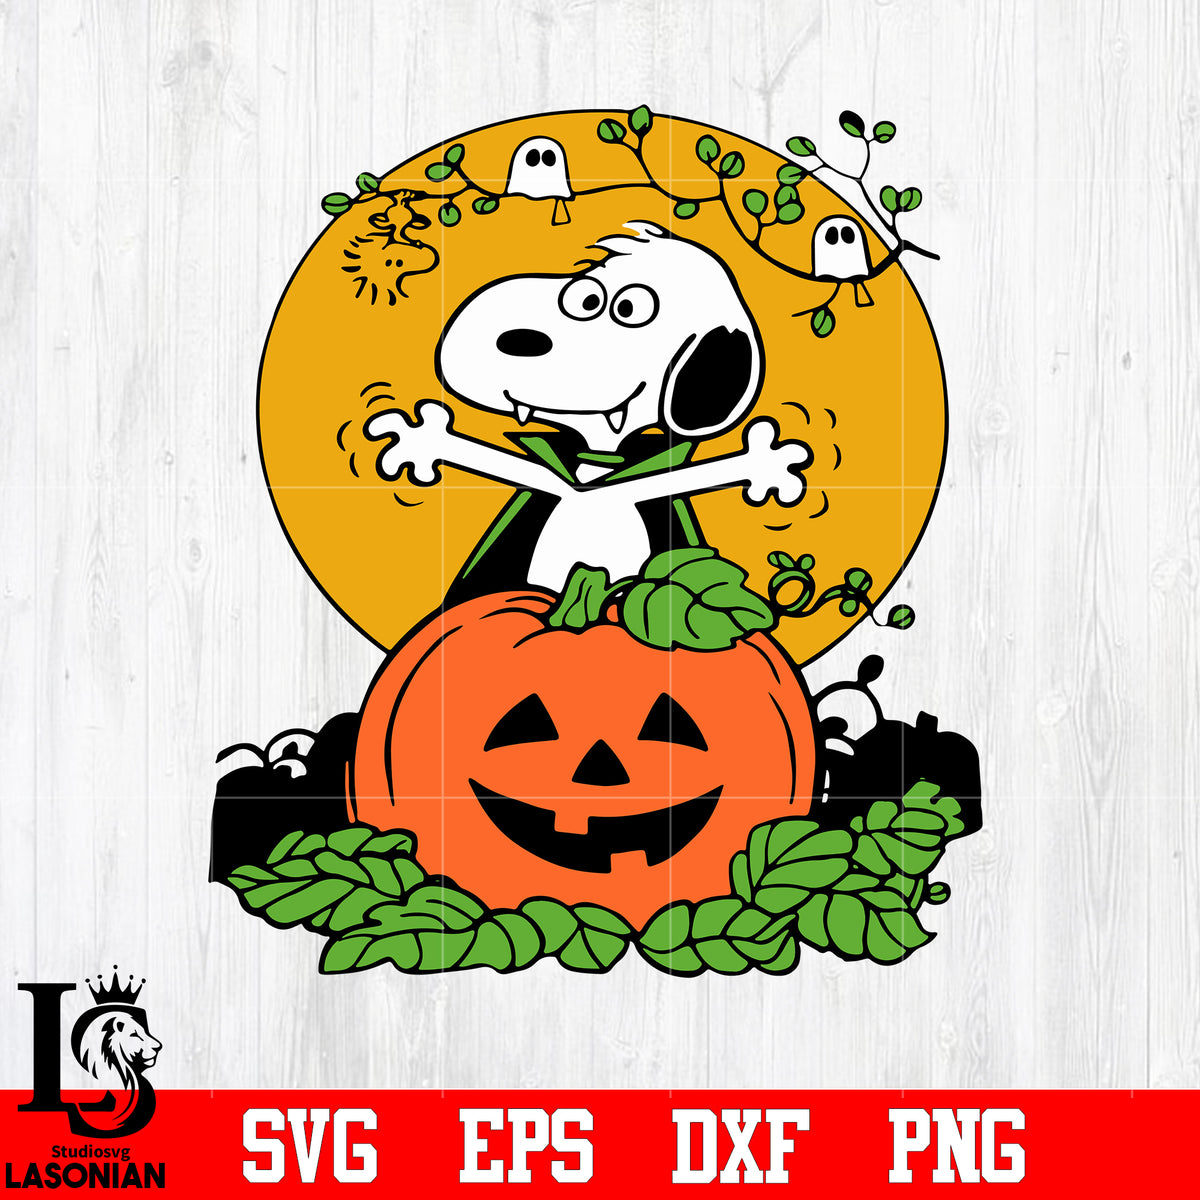 Kansas City Chiefs Snoopy heart svg eps dxf png file – lasoniansvg